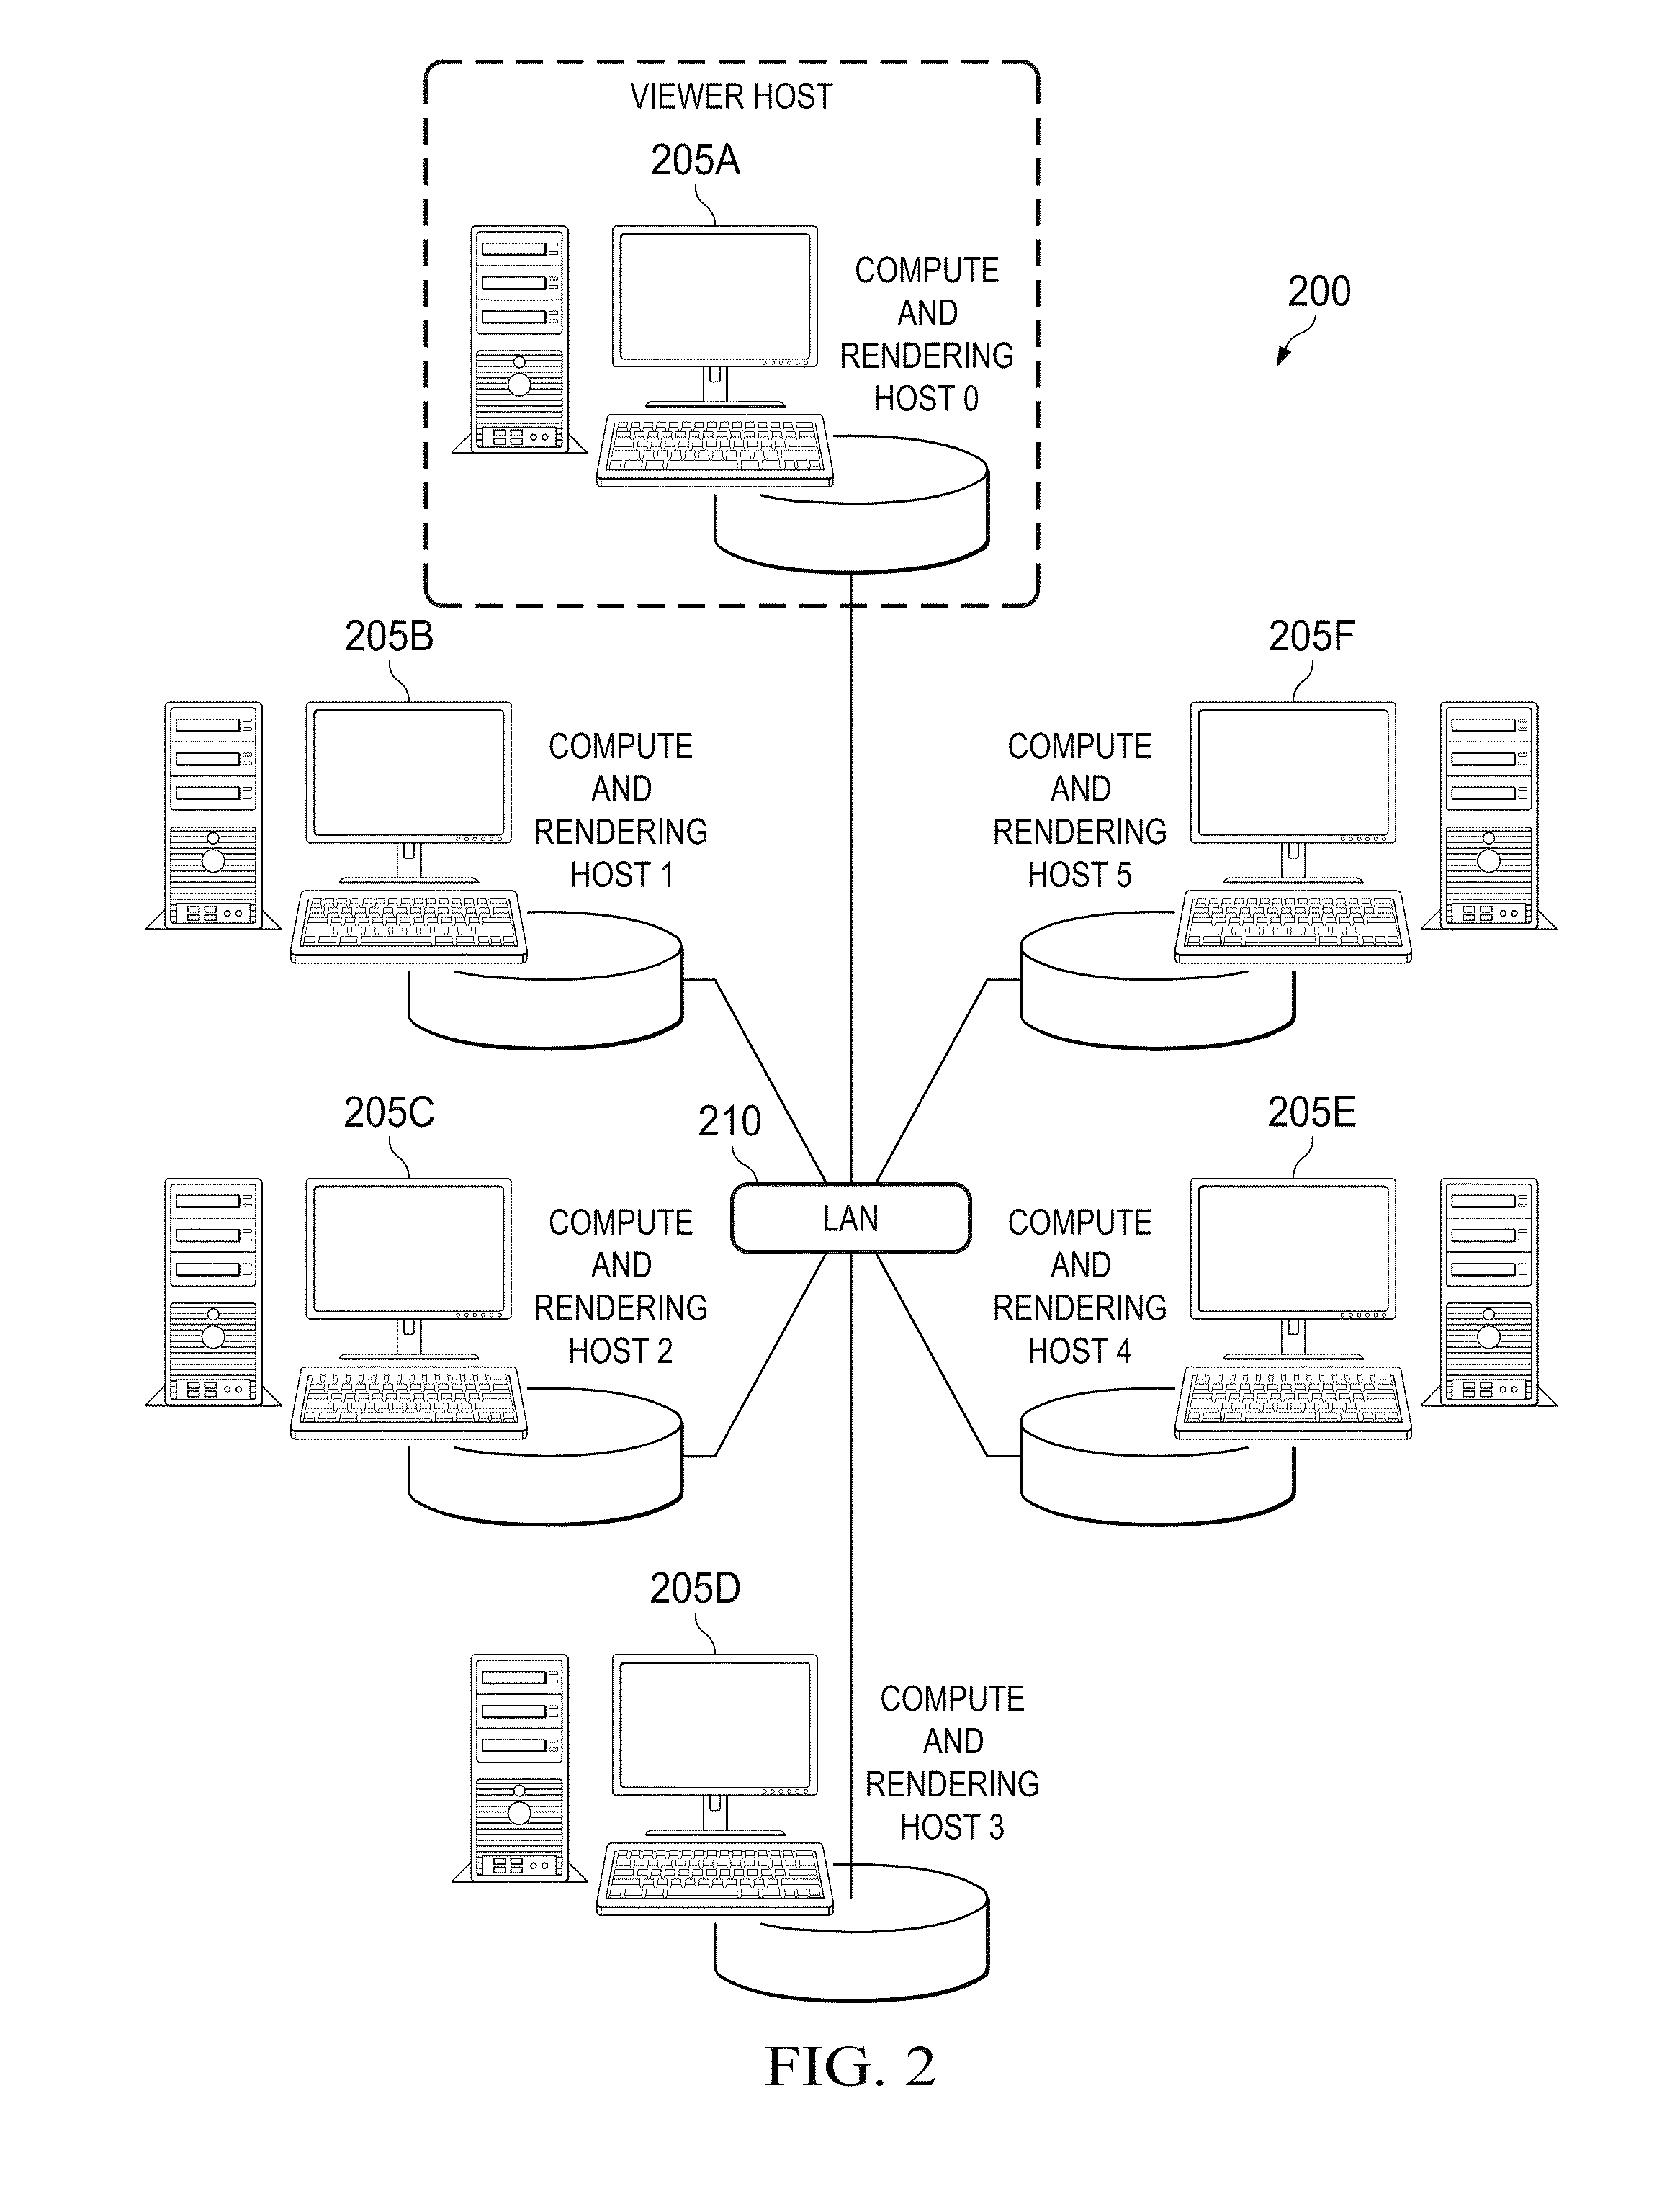 Asynchronous compute integrated into large-scale data rendering using dedicated, separate computing and rendering clusters